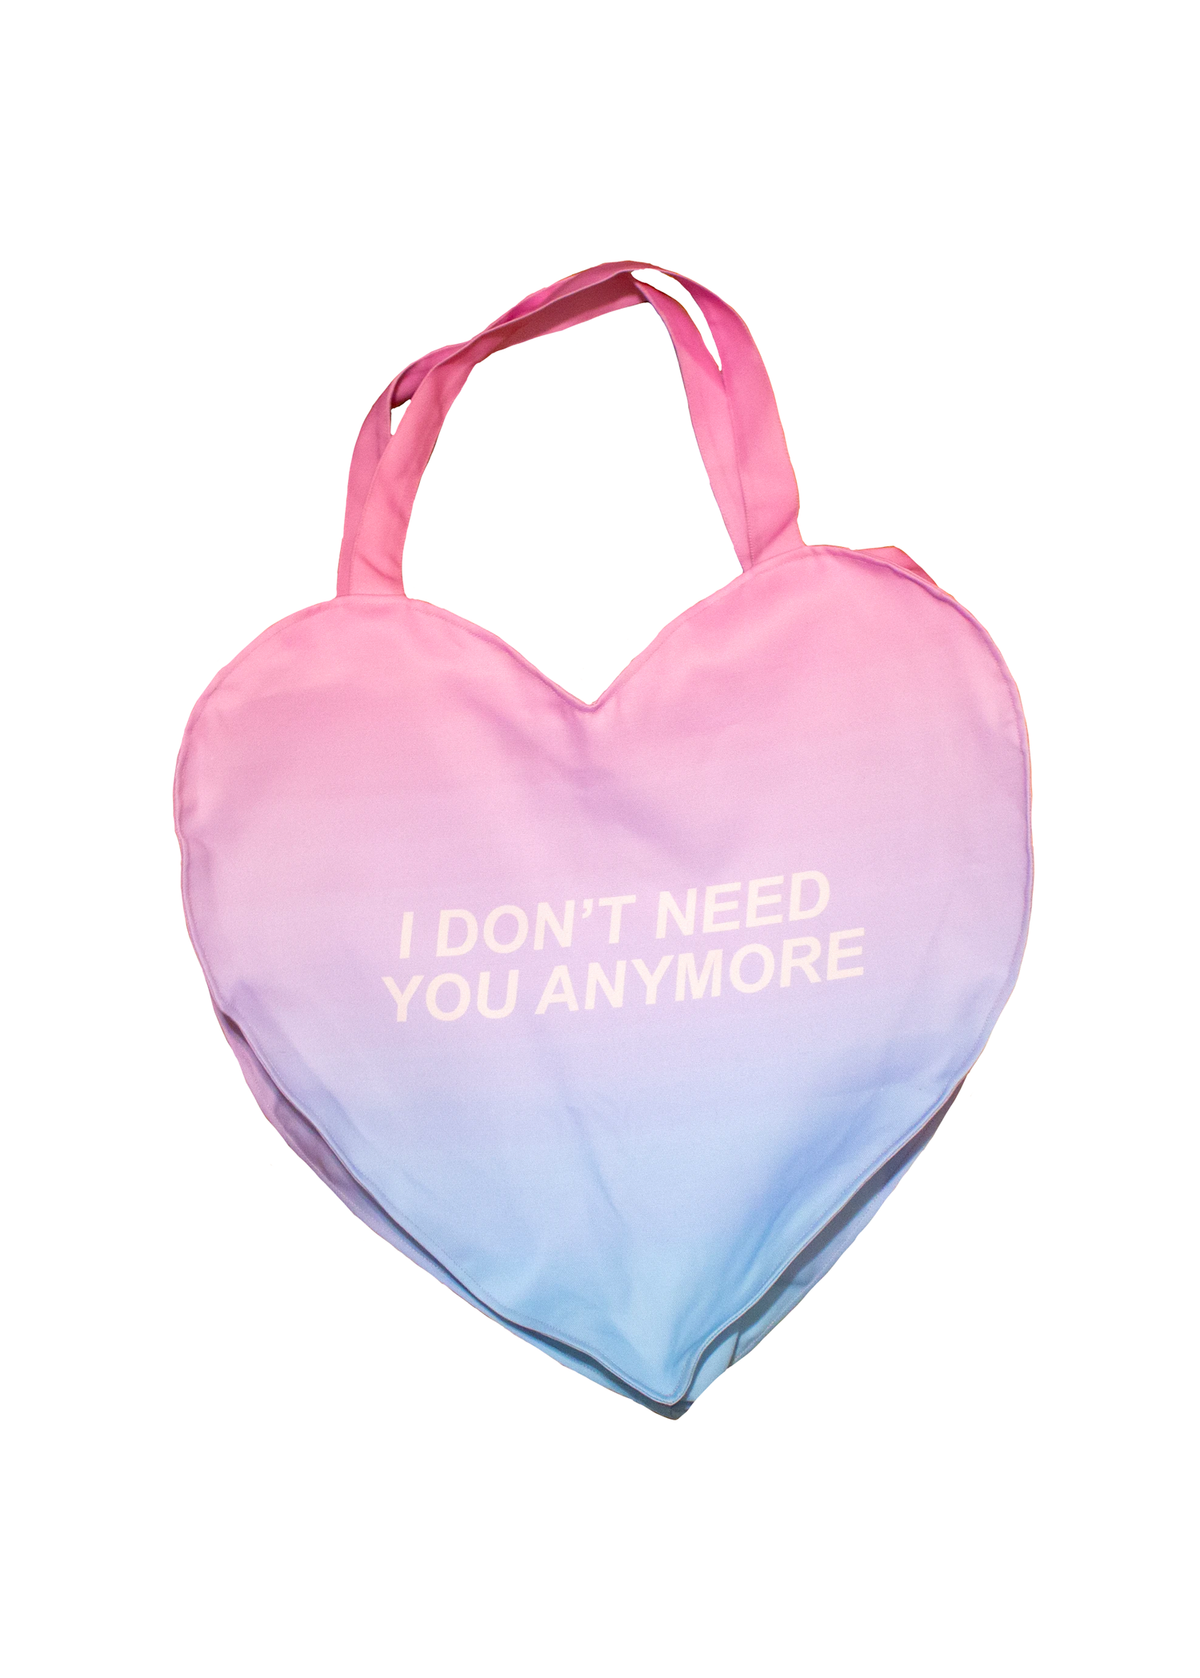 Moved On Giant Heart Tote